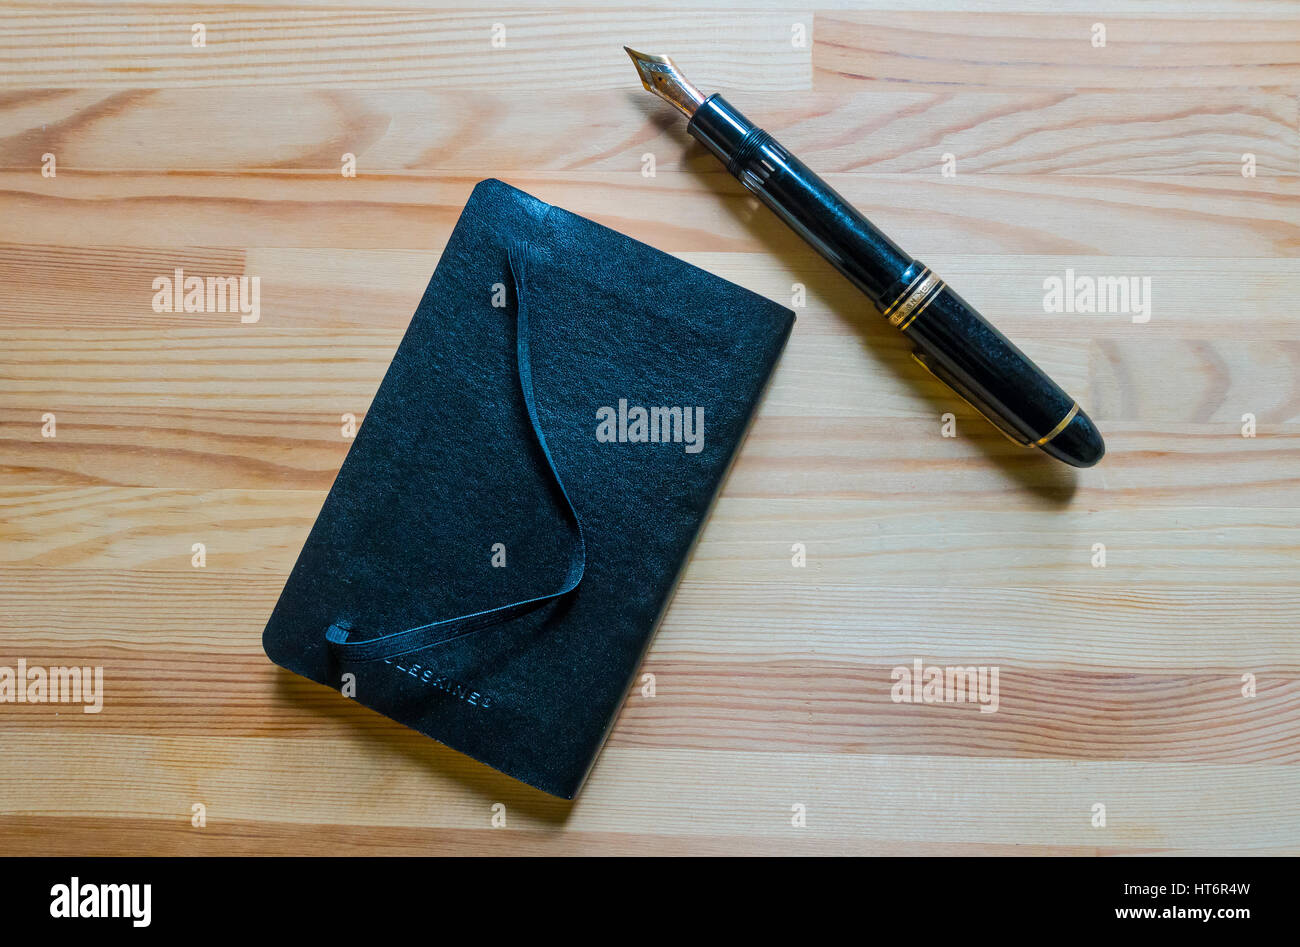 Montblanc Meisterstruck 149 fountain pen and a small Moleskin notebook  Stock Photo - Alamy